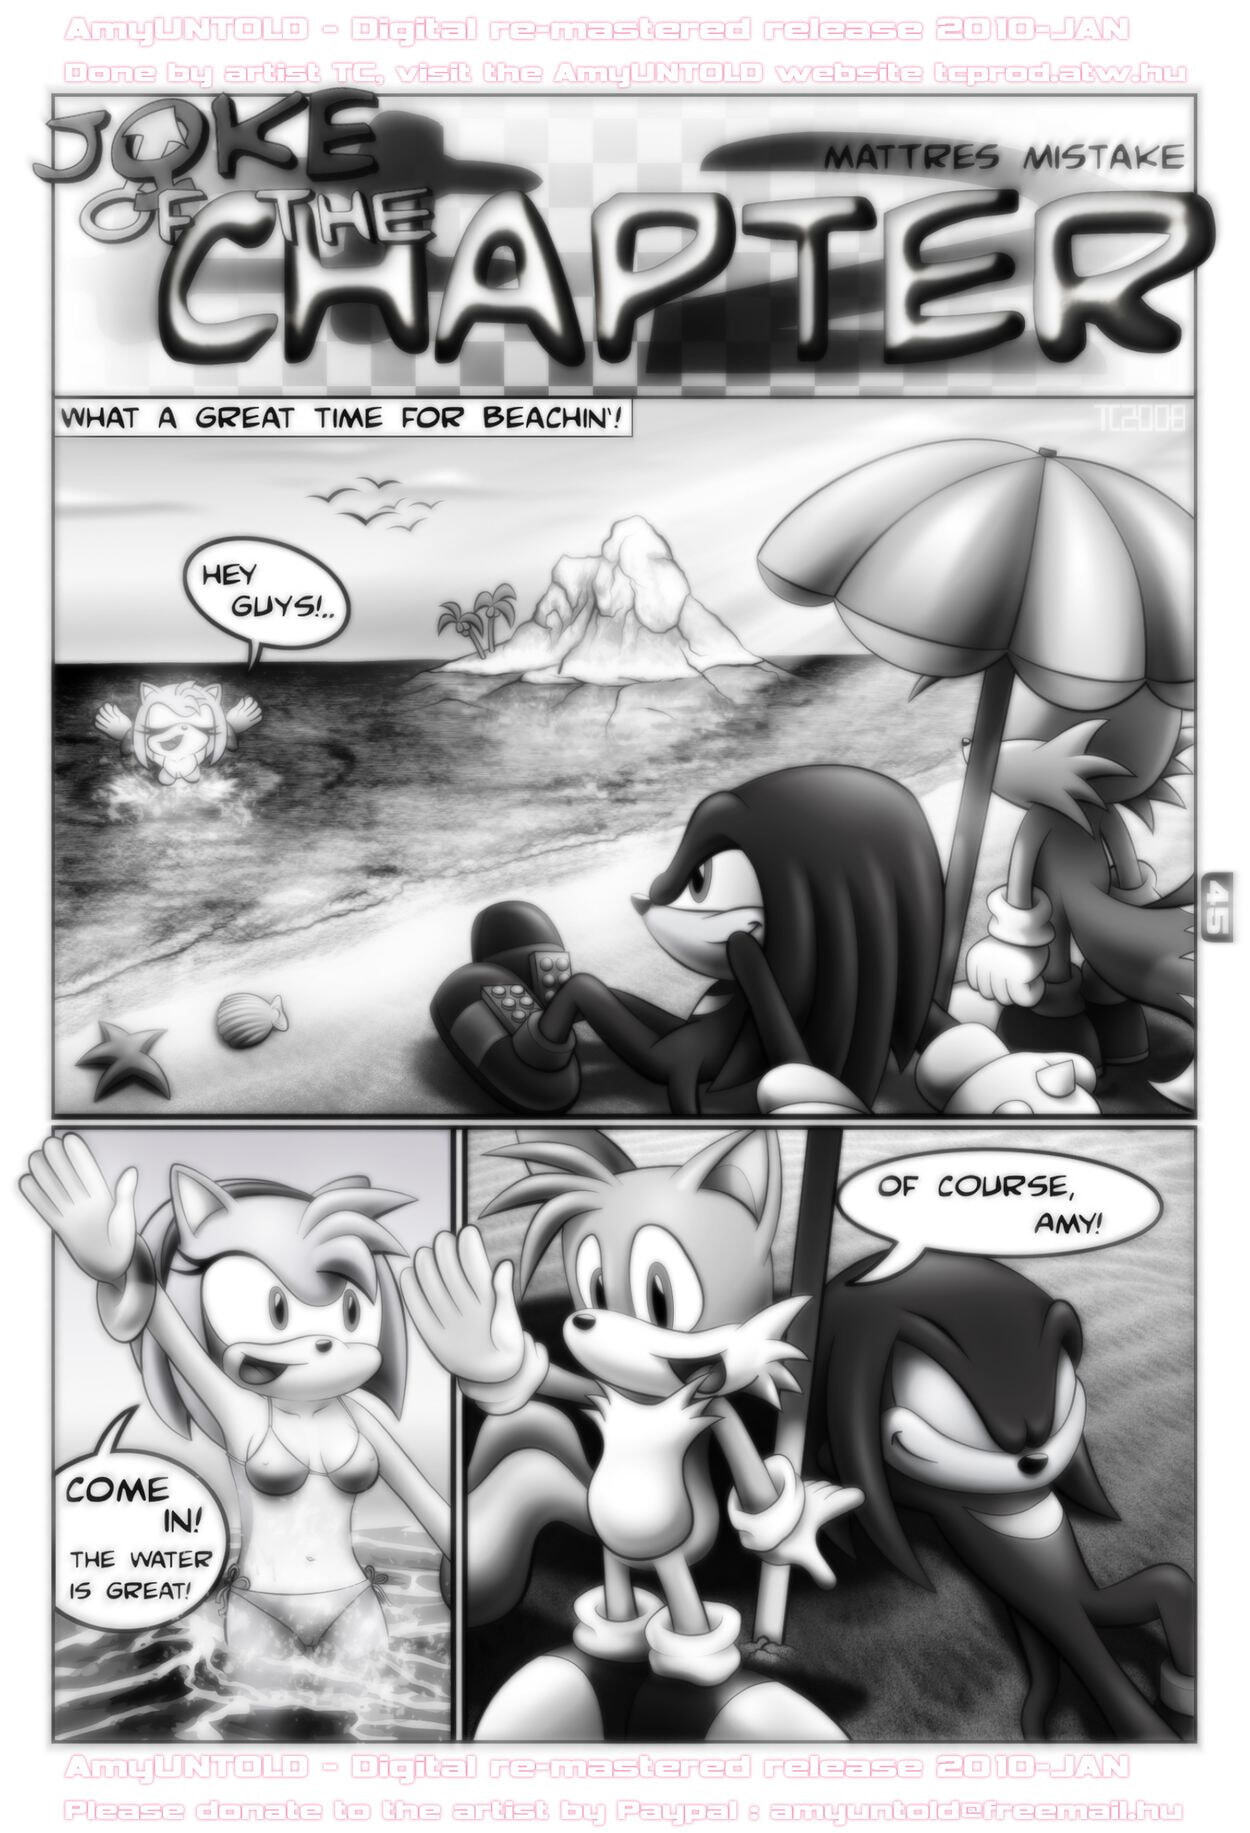 Amy Untold - Finally - Page 45